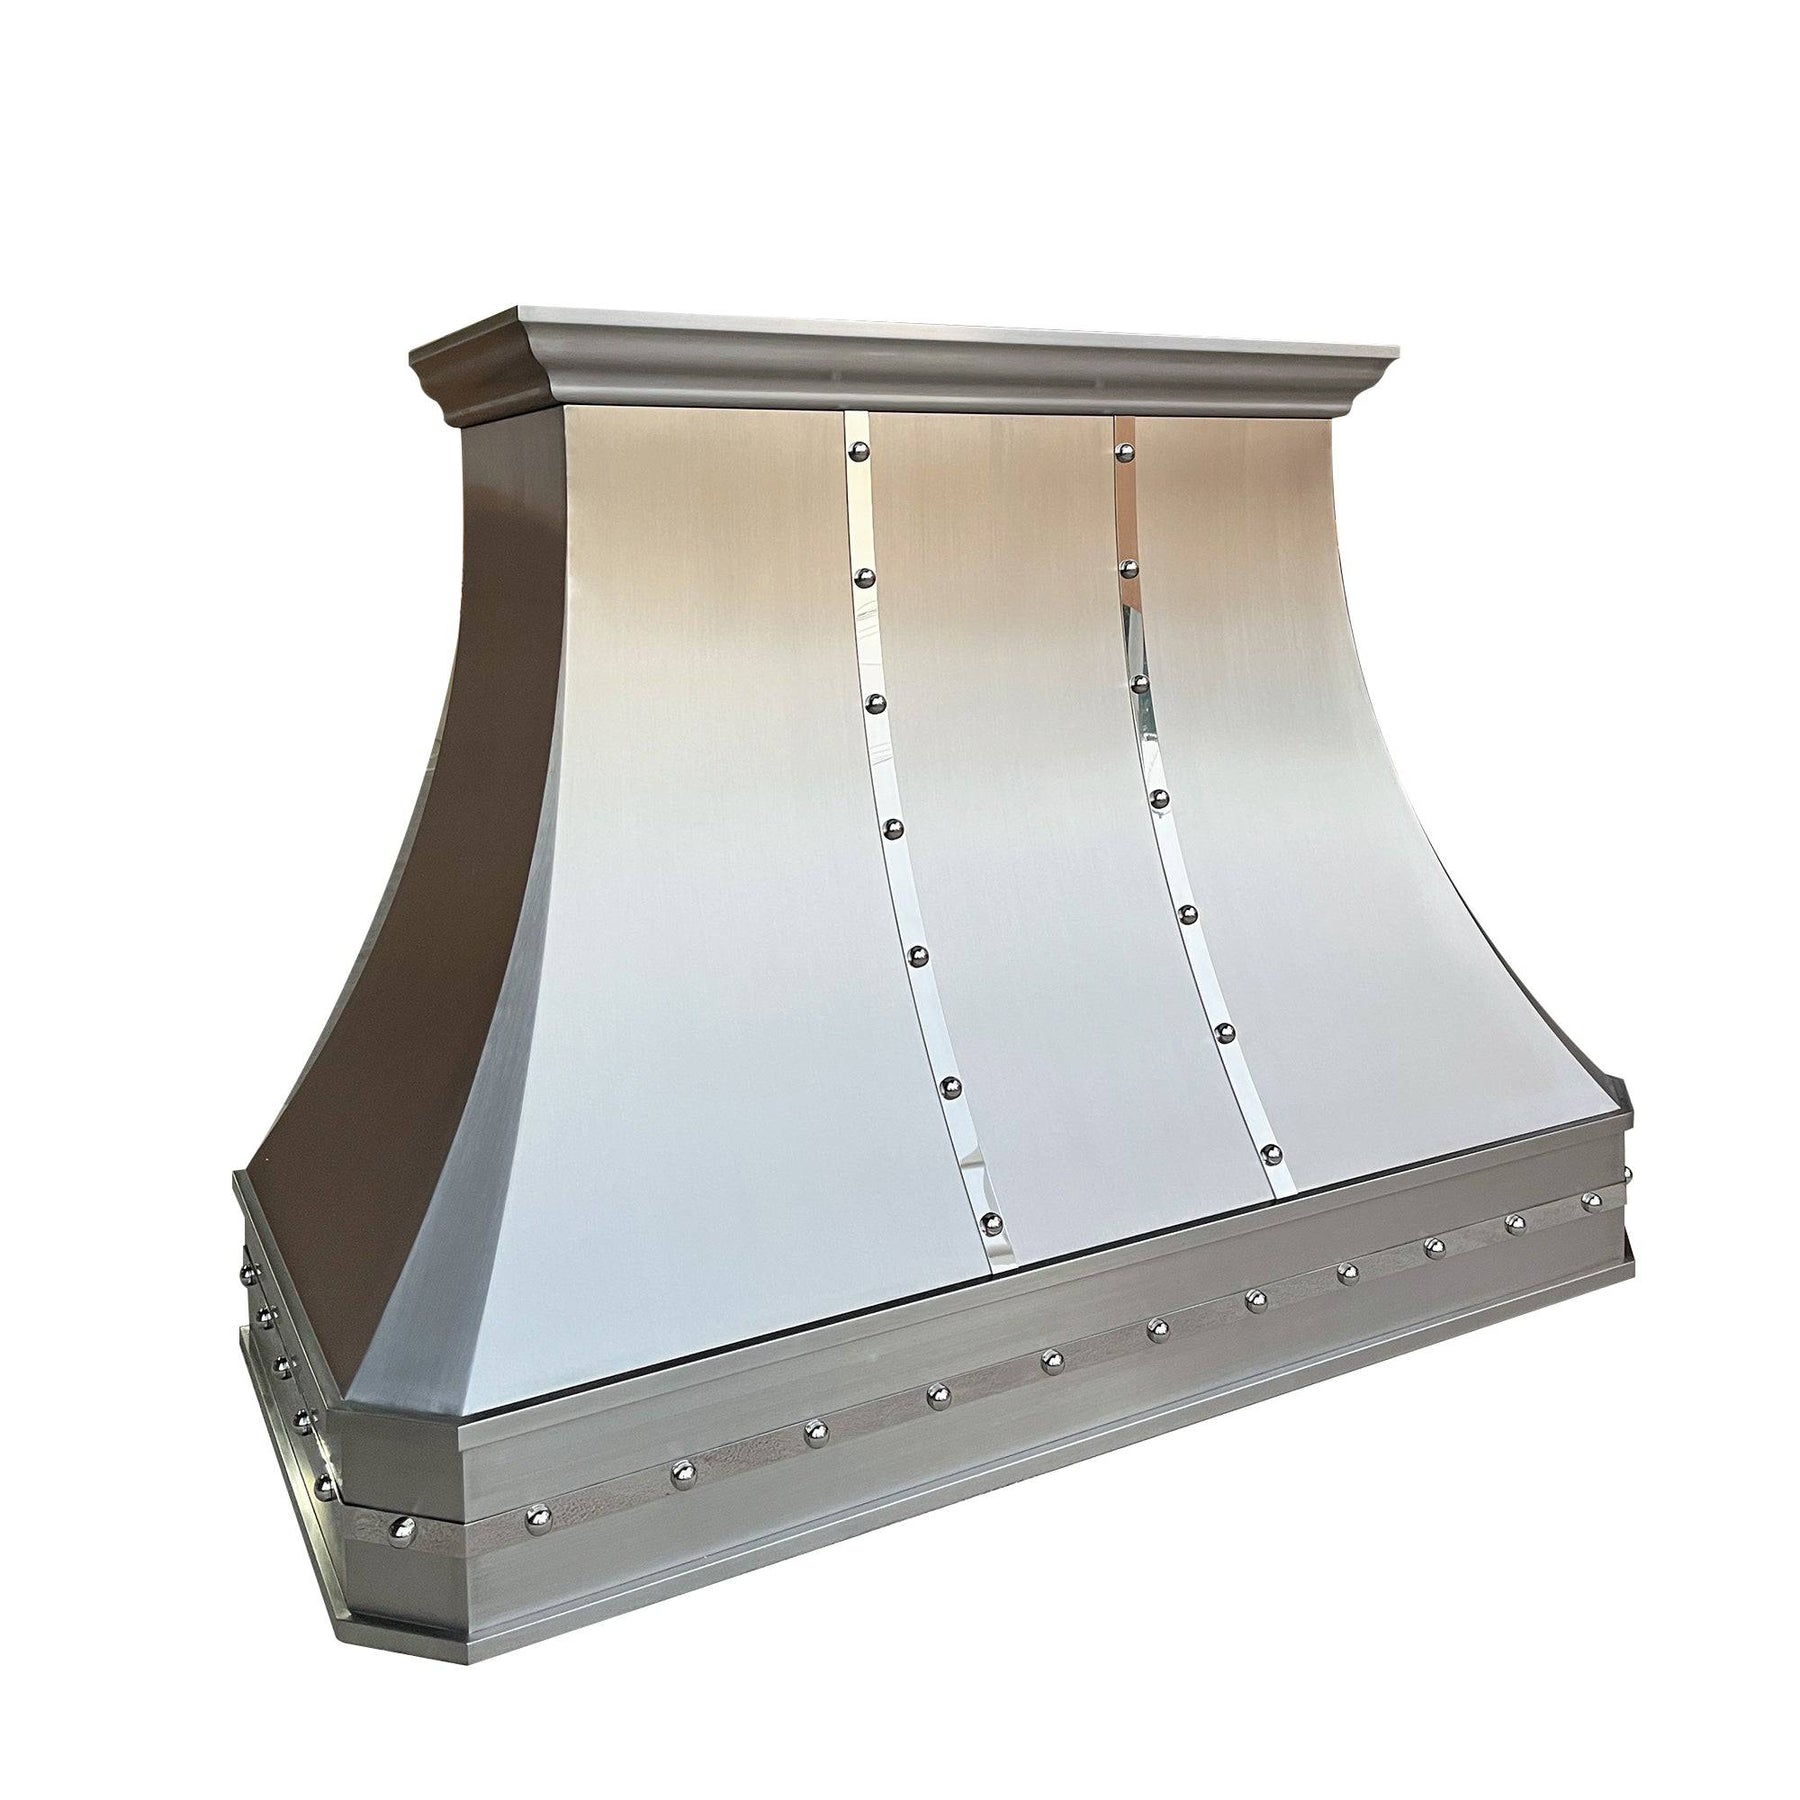 Fobest Custom Handcrafted Stainless Steel Range Hood FSS-41 - Stainless Steel Range Hood-Fobest Appliance